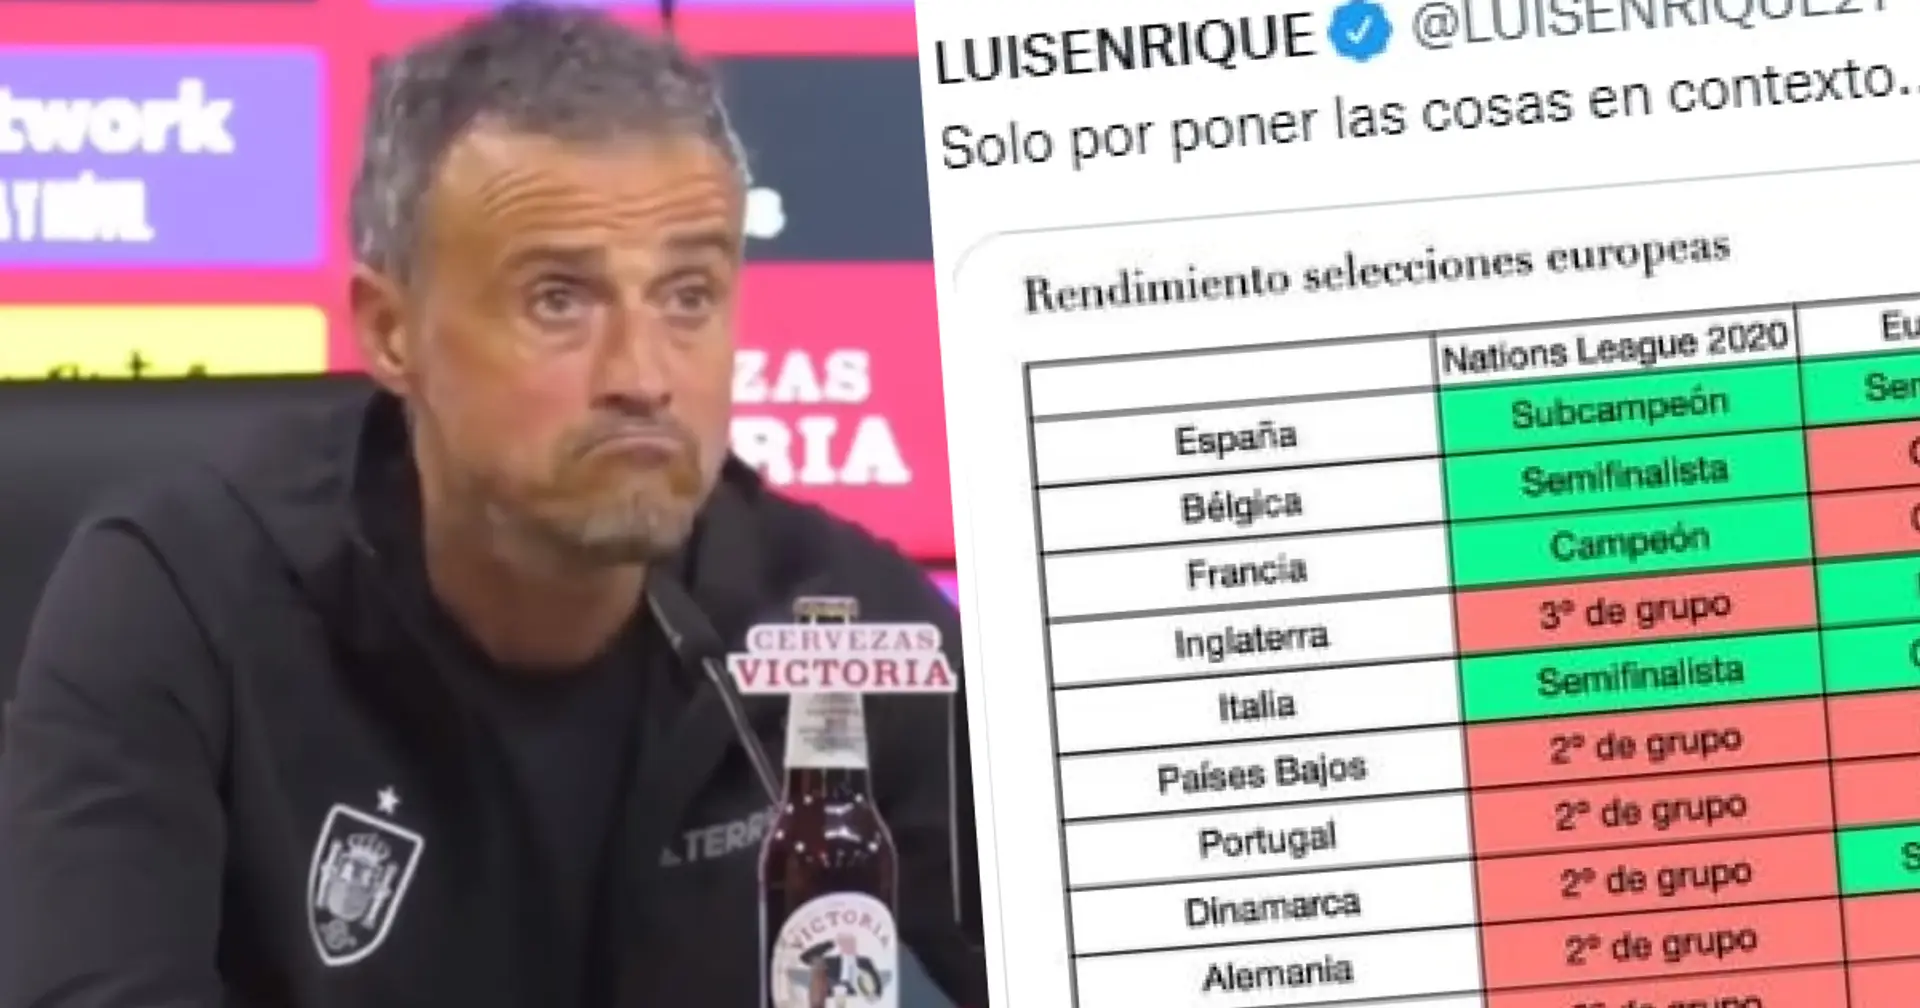 Luis Enrique hits back at critics, proves his right with one pic